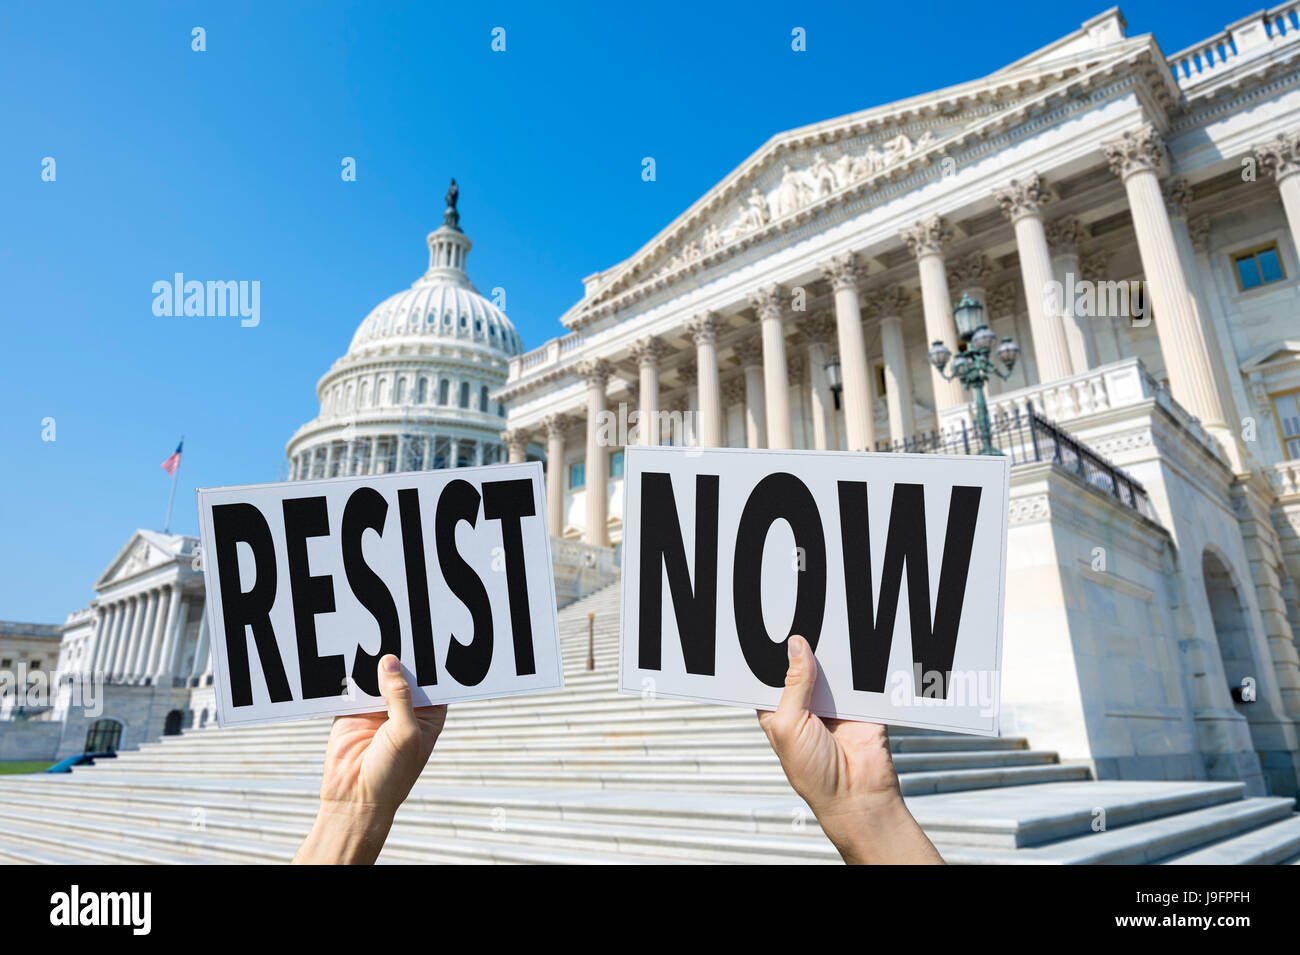 Hands of protesters in Washington, DC holding up signs urging their representatives on Capitol Hill to RESIST NOW, referring to the White House Stock Photo